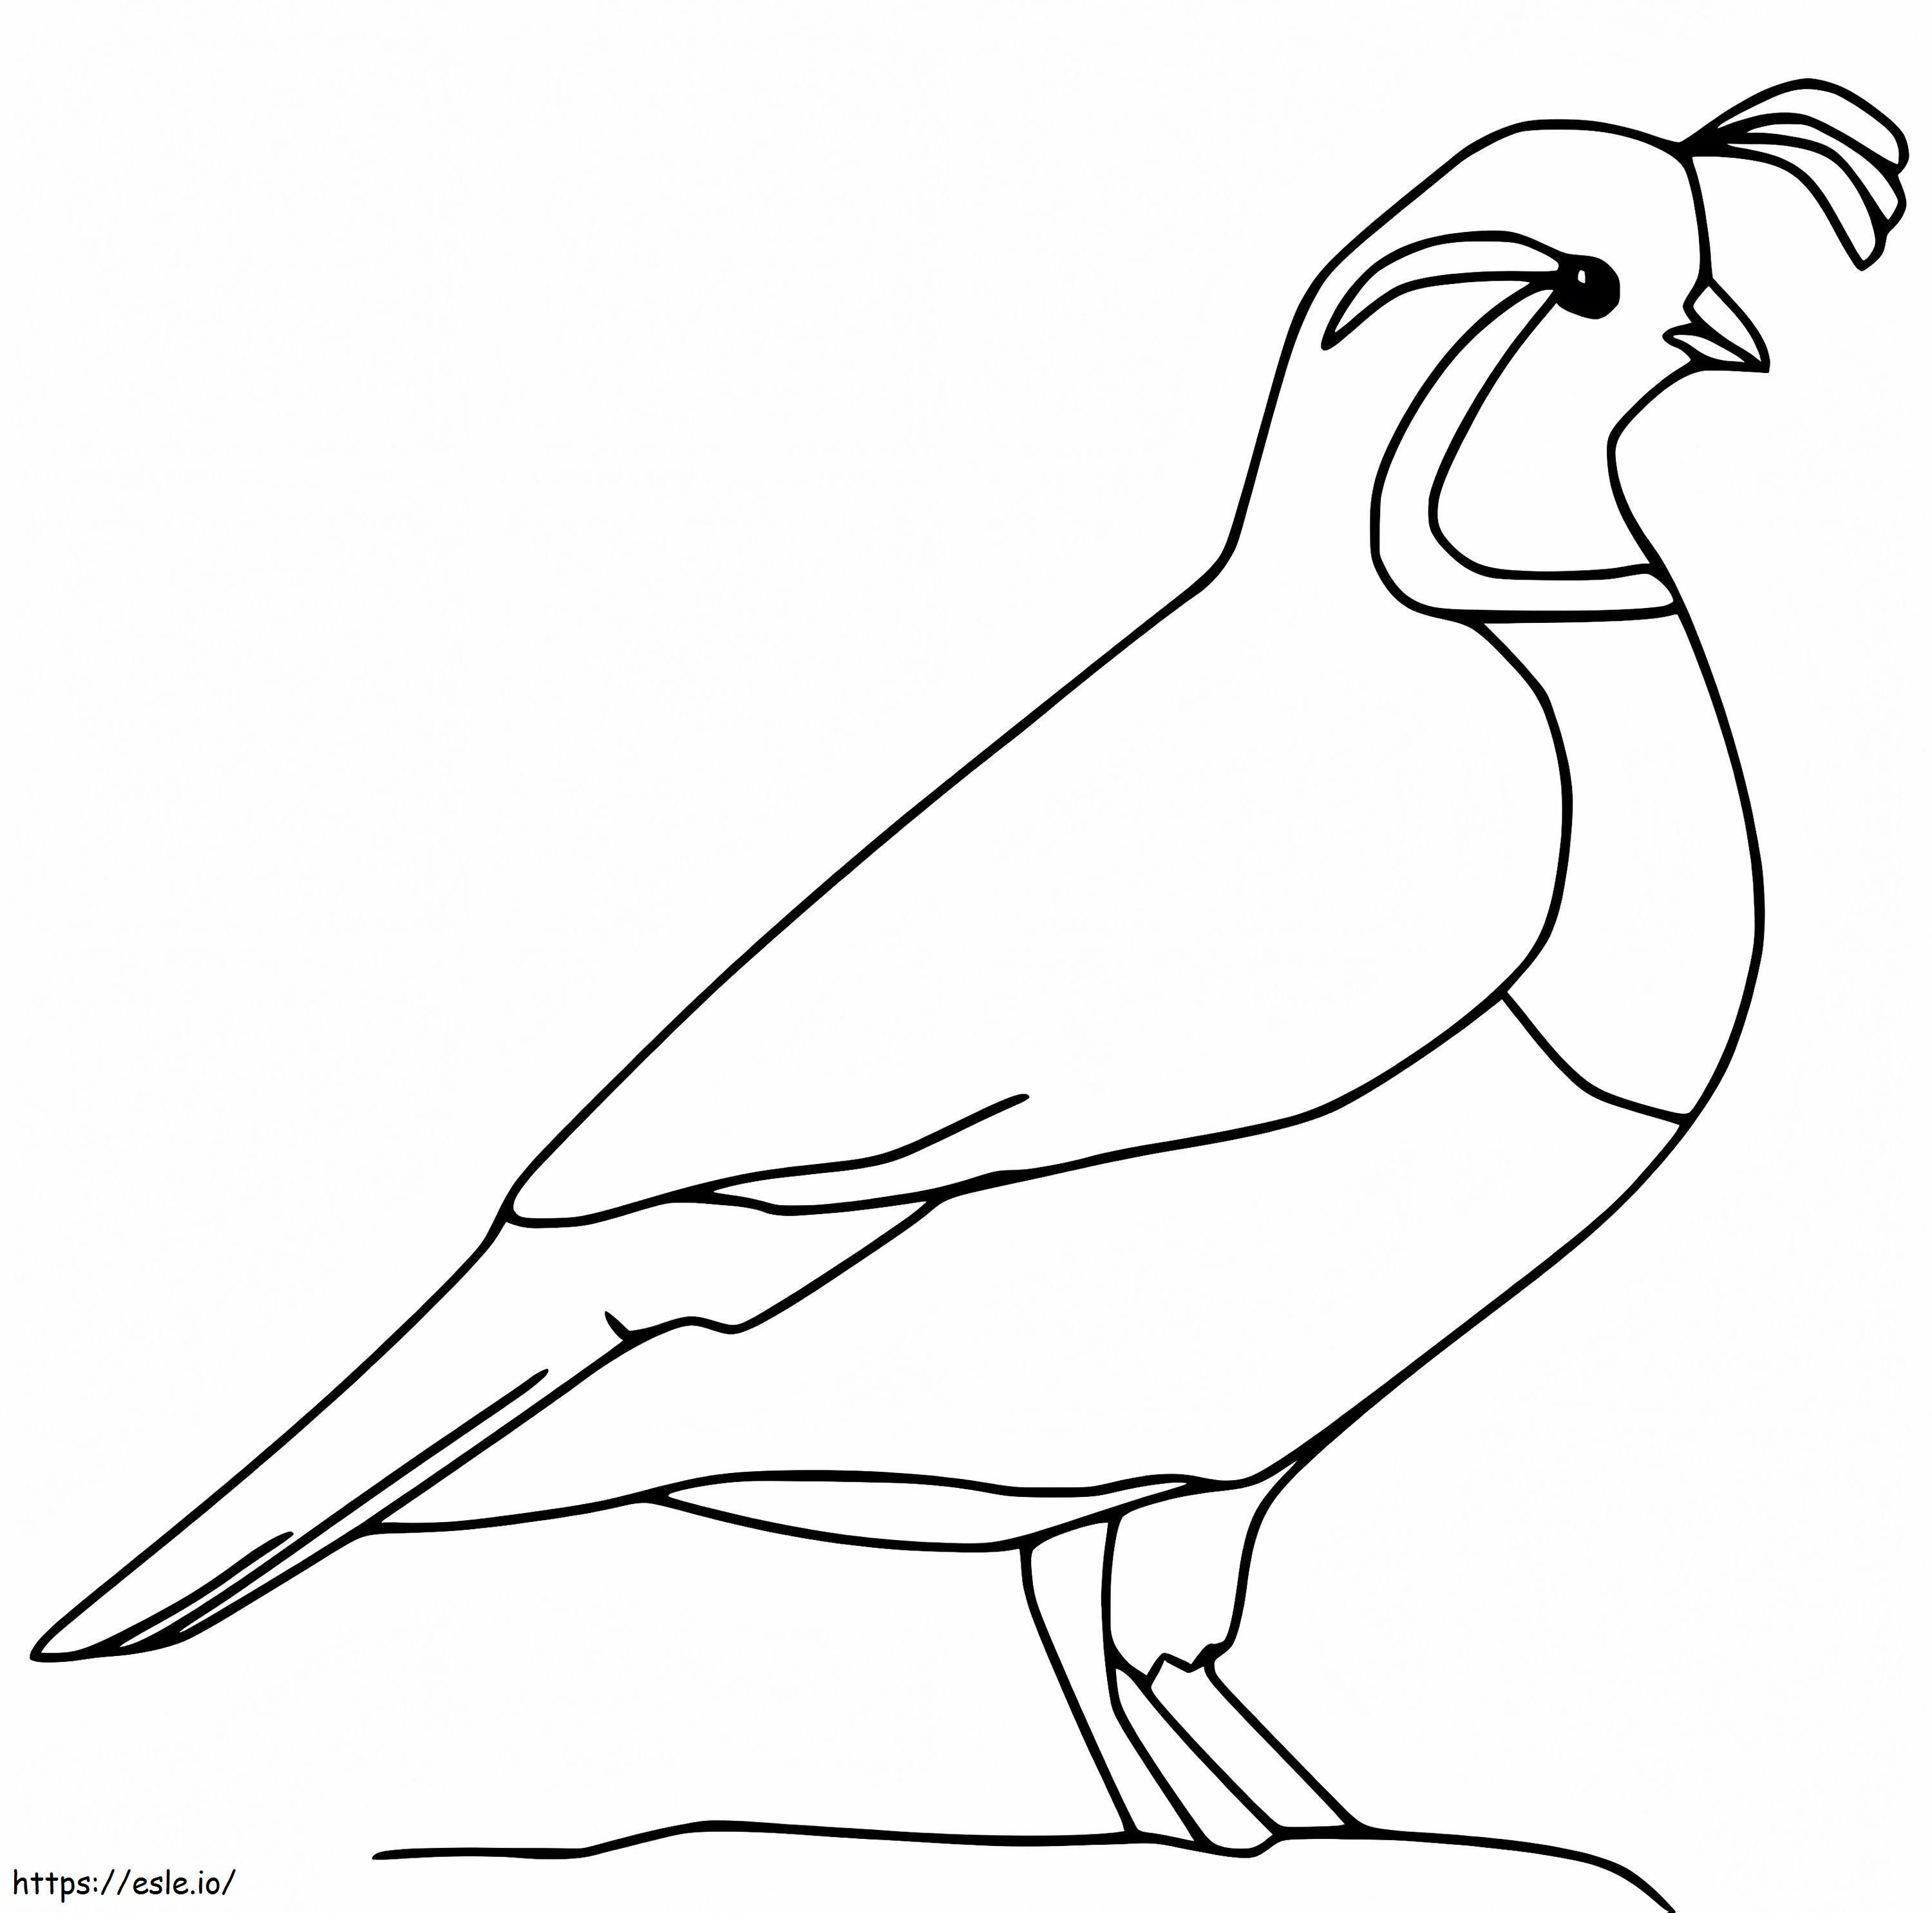 Easy Quail coloring page